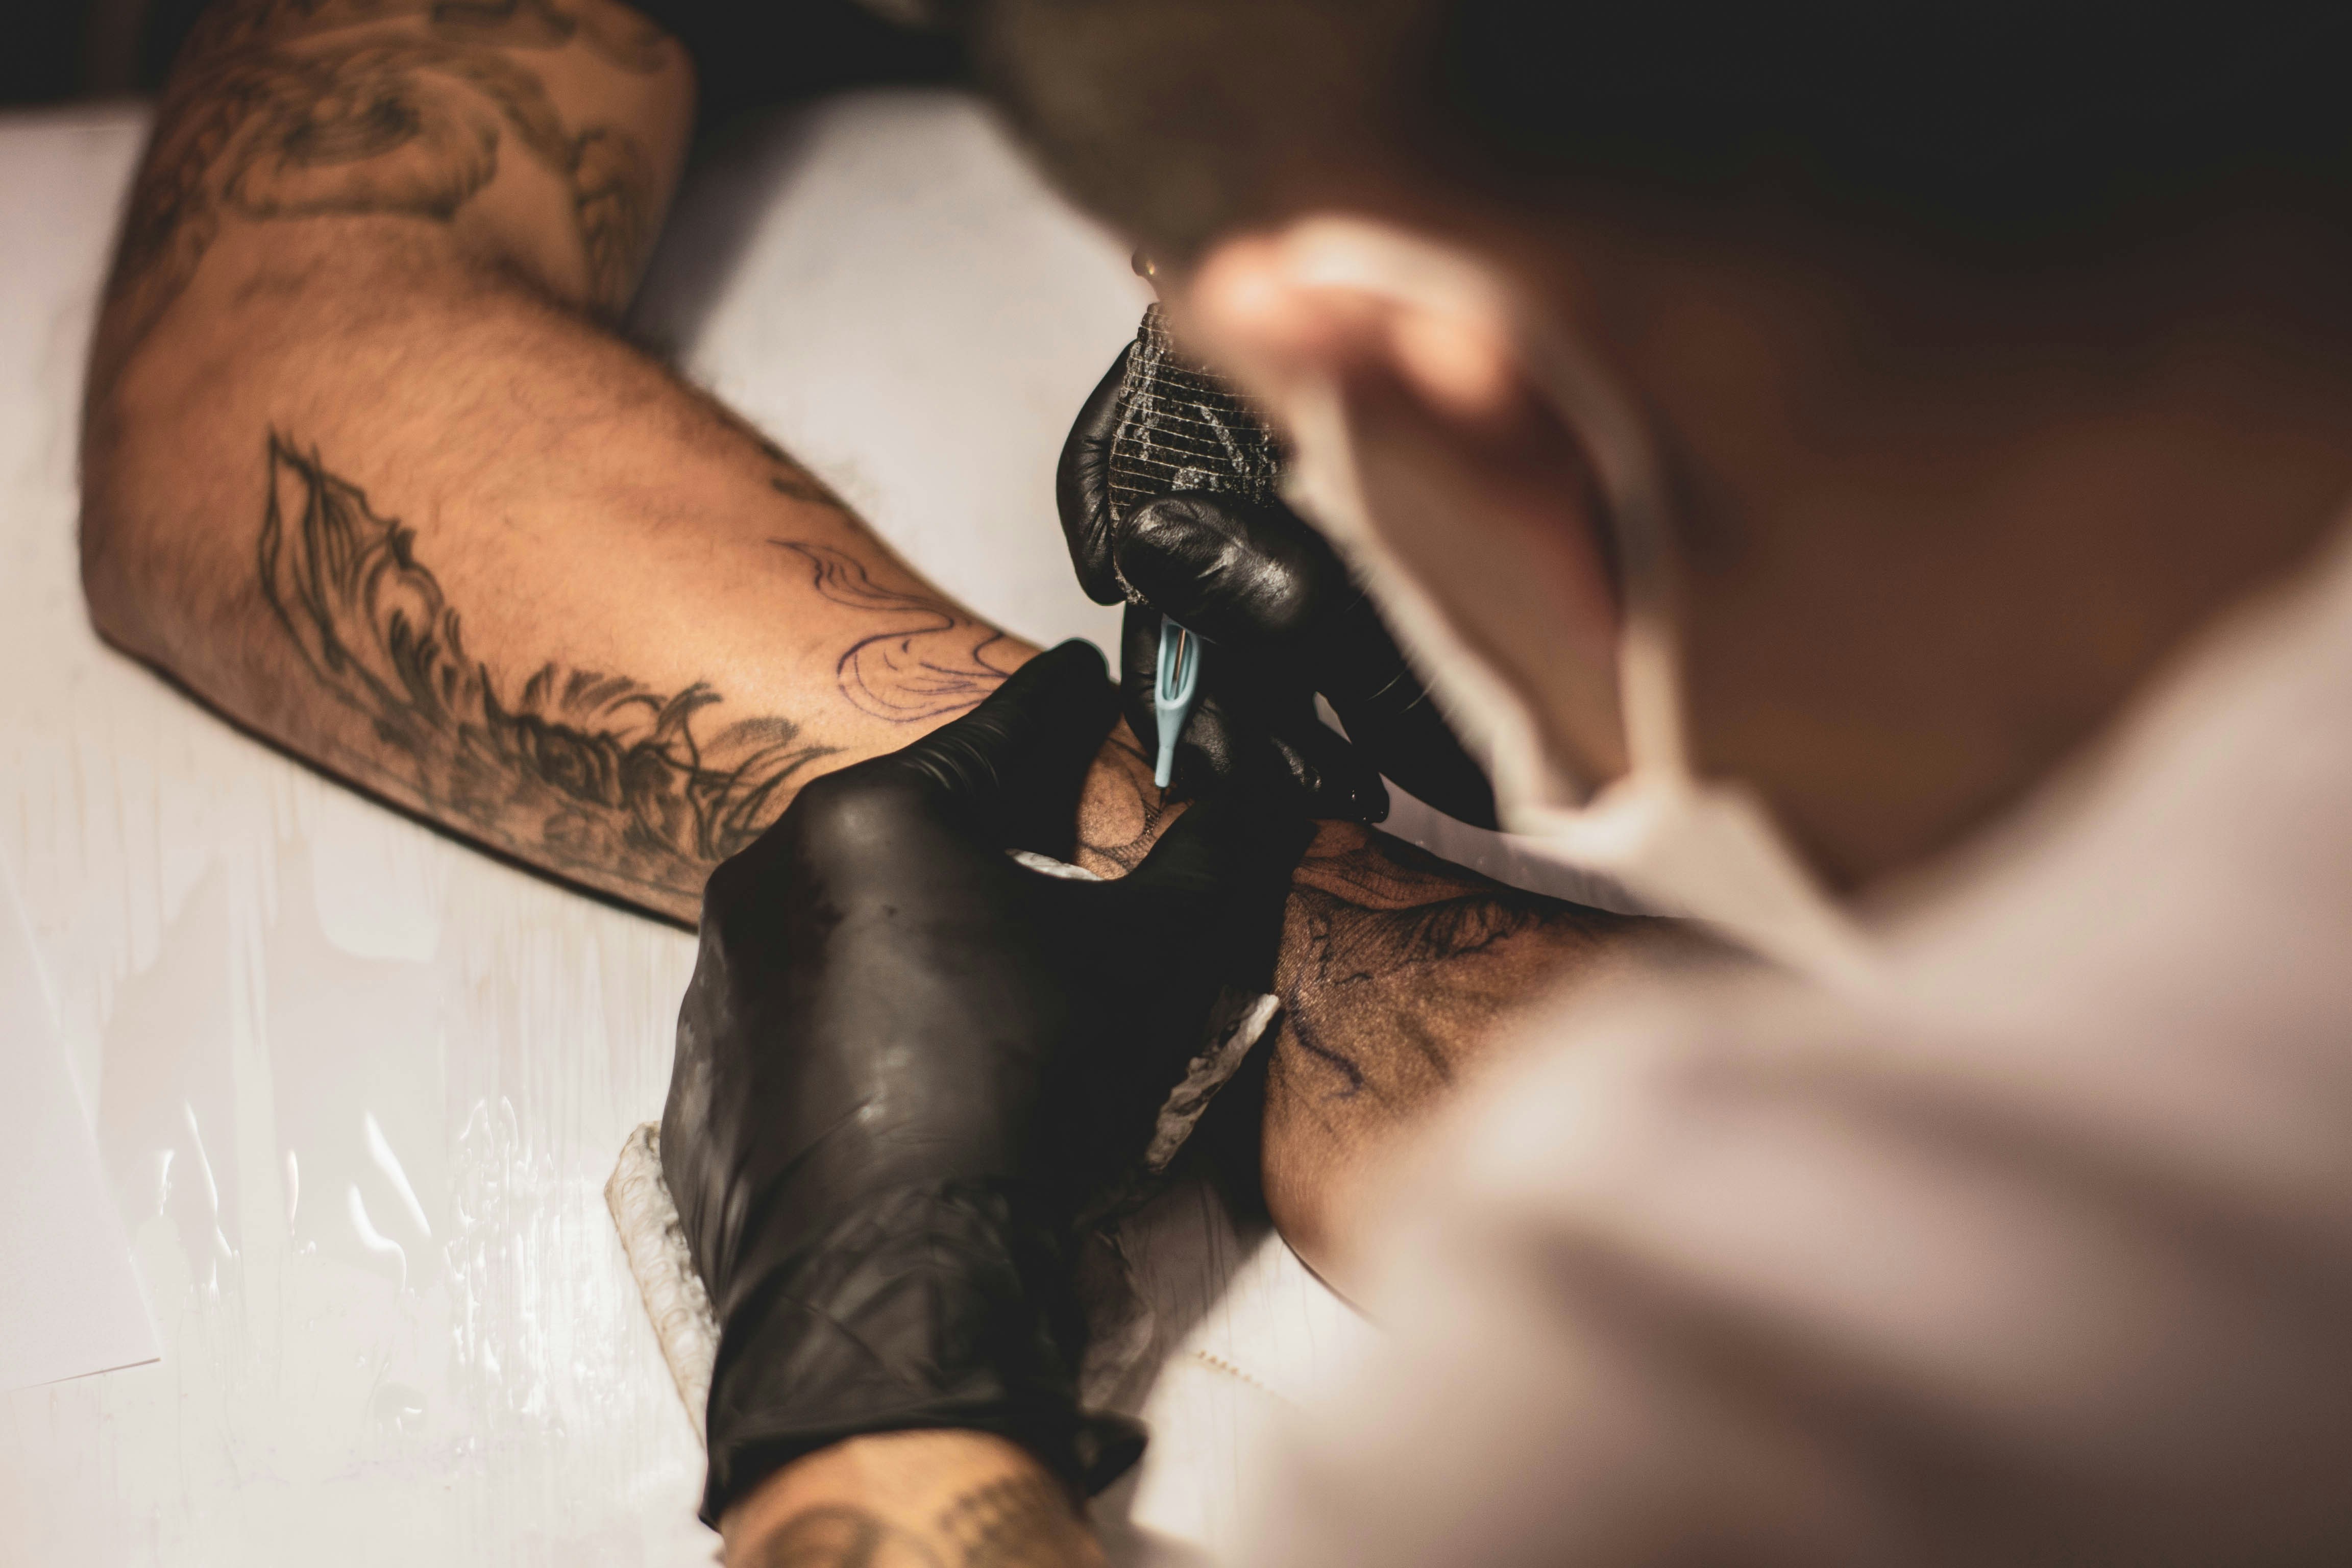 Medicine for tattoo infection